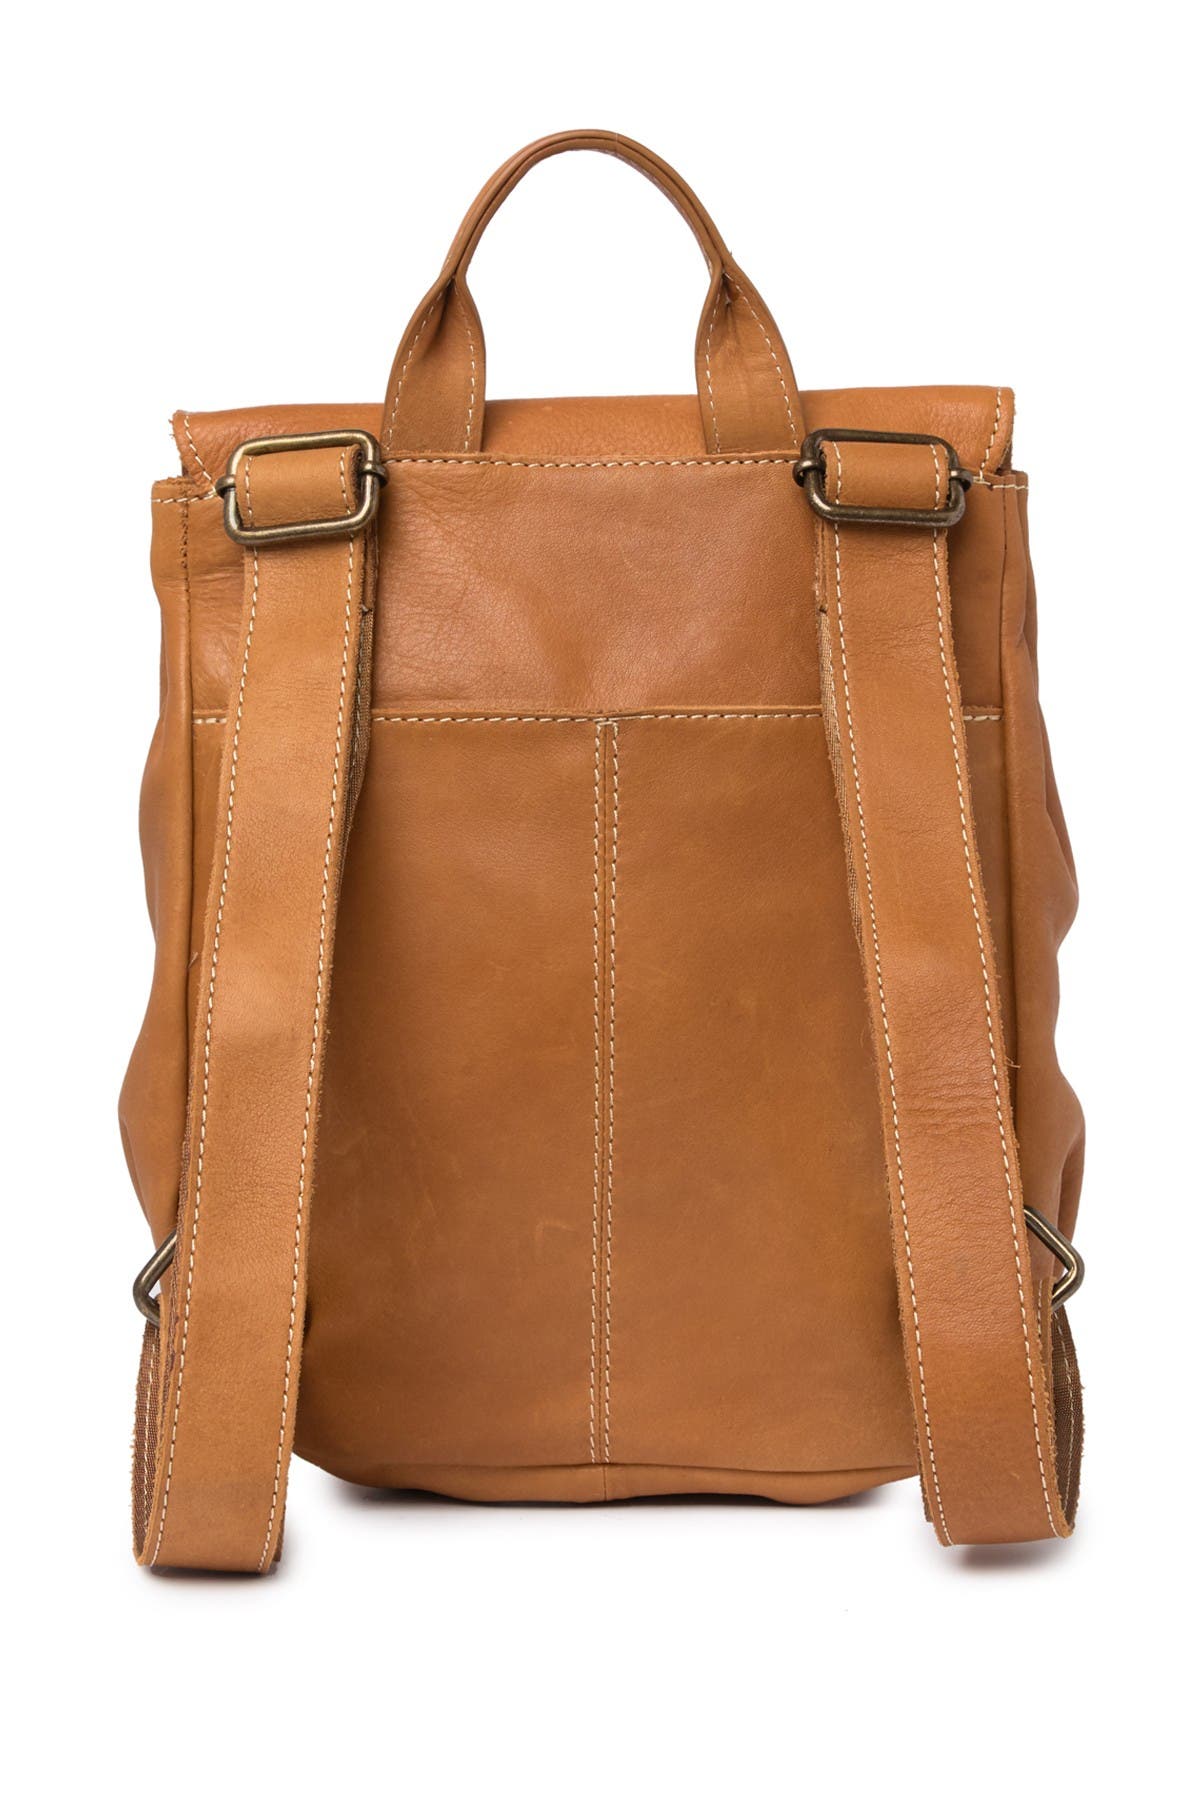 AMERICAN LEATHER CO. | Liberty Leather Flap Backpack | Nordstrom Rack